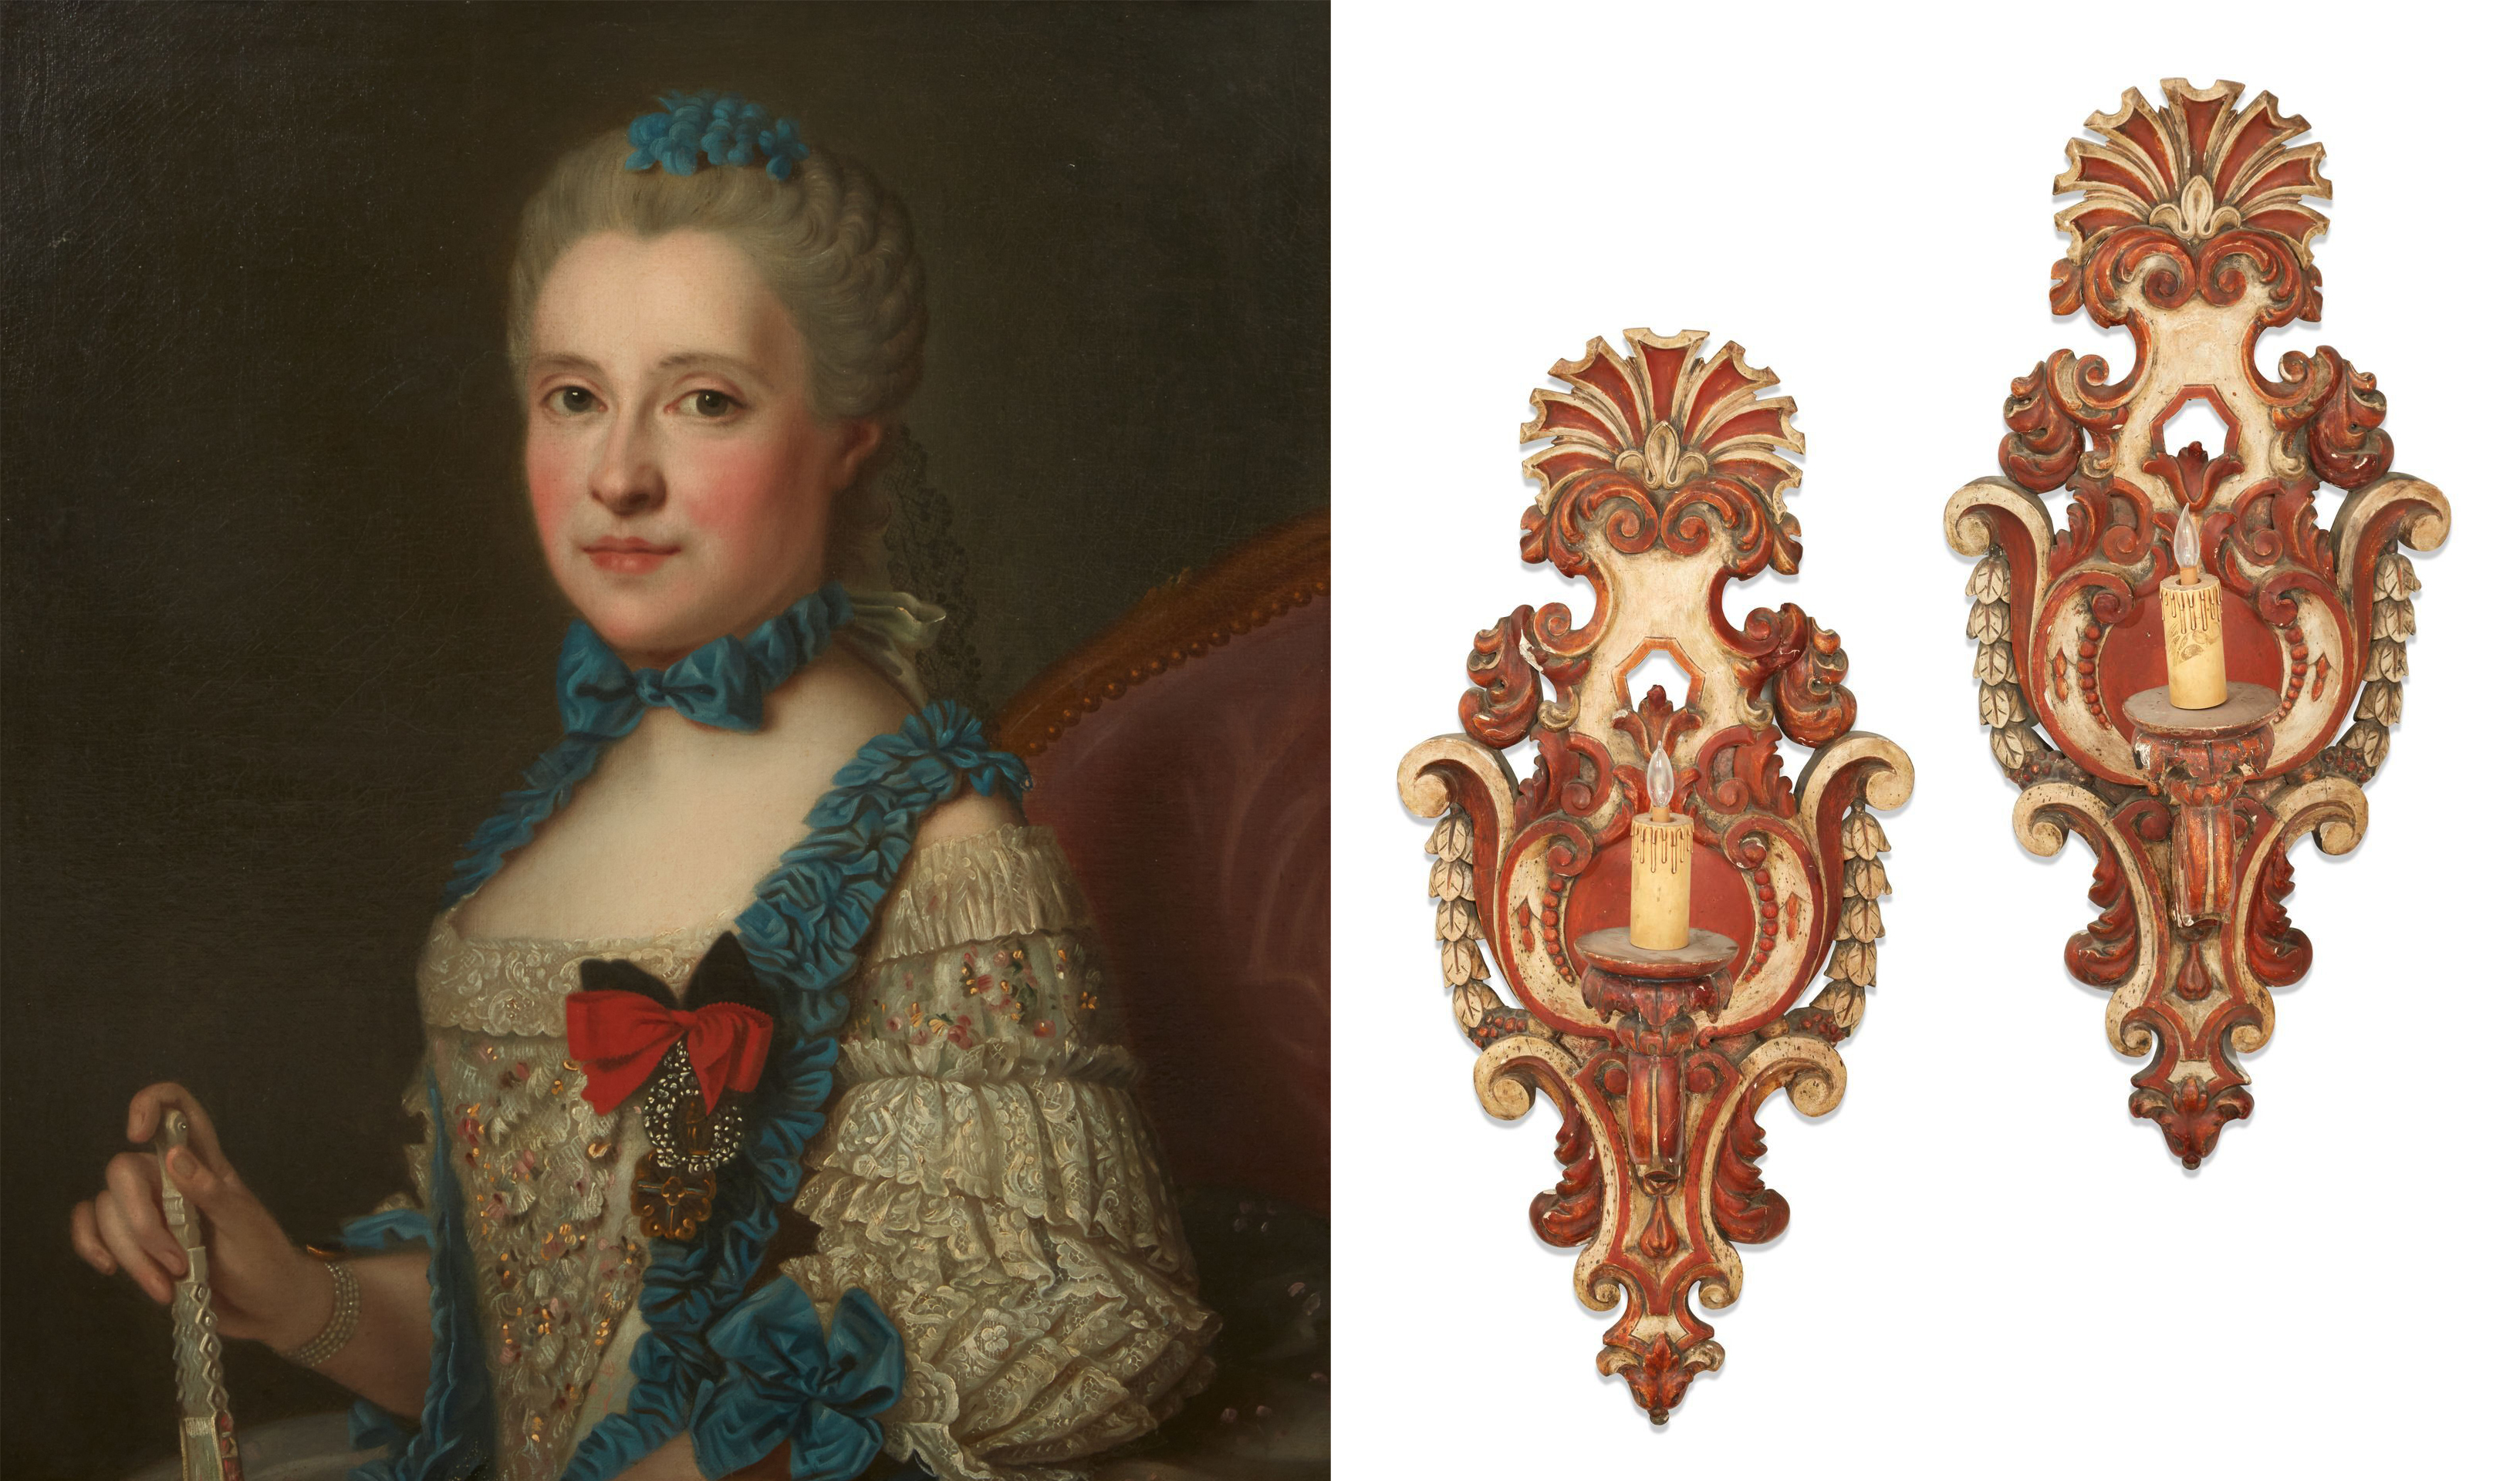 Left, Portrait of an aristocratic lady attributed to Jean Marc Nattier, from the Mitzi Gaynor collection, est. $8,000-$12,000; Right, pair of Italian Baroque paint decorated wall lights from the De Laurentiis collection, est. $2,000-$3,000